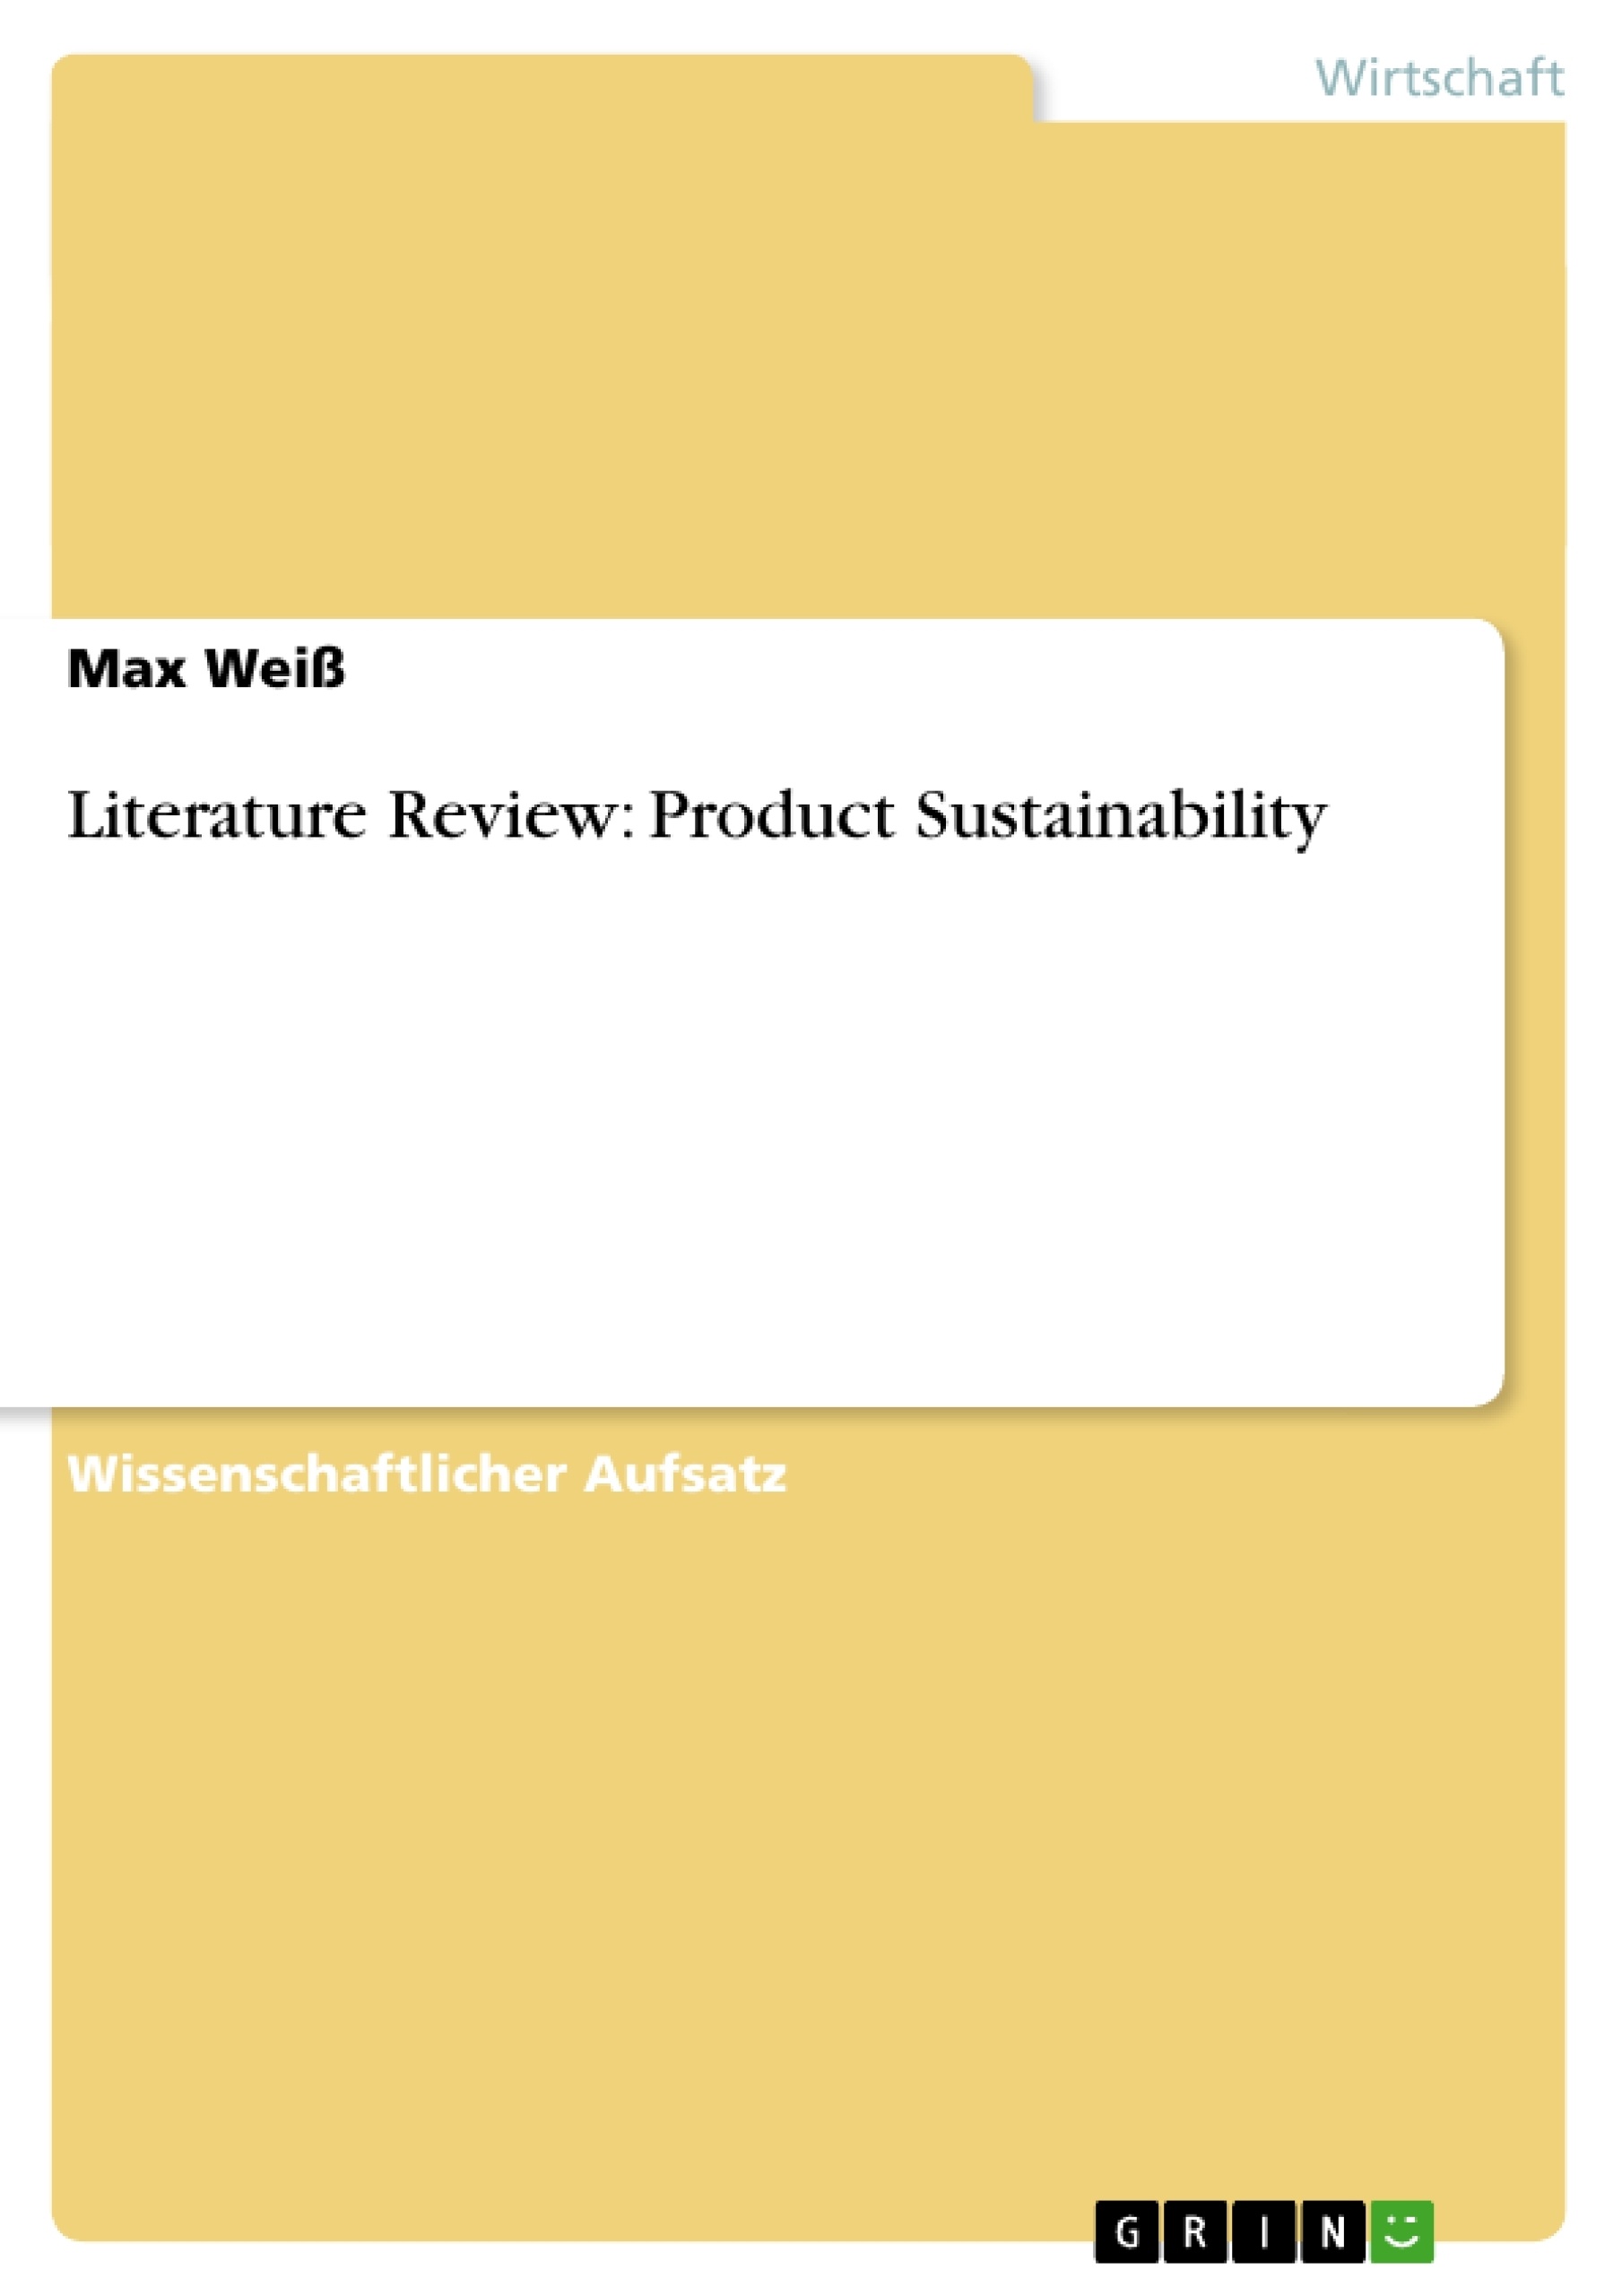 Titel: Literature Review: Product Sustainability